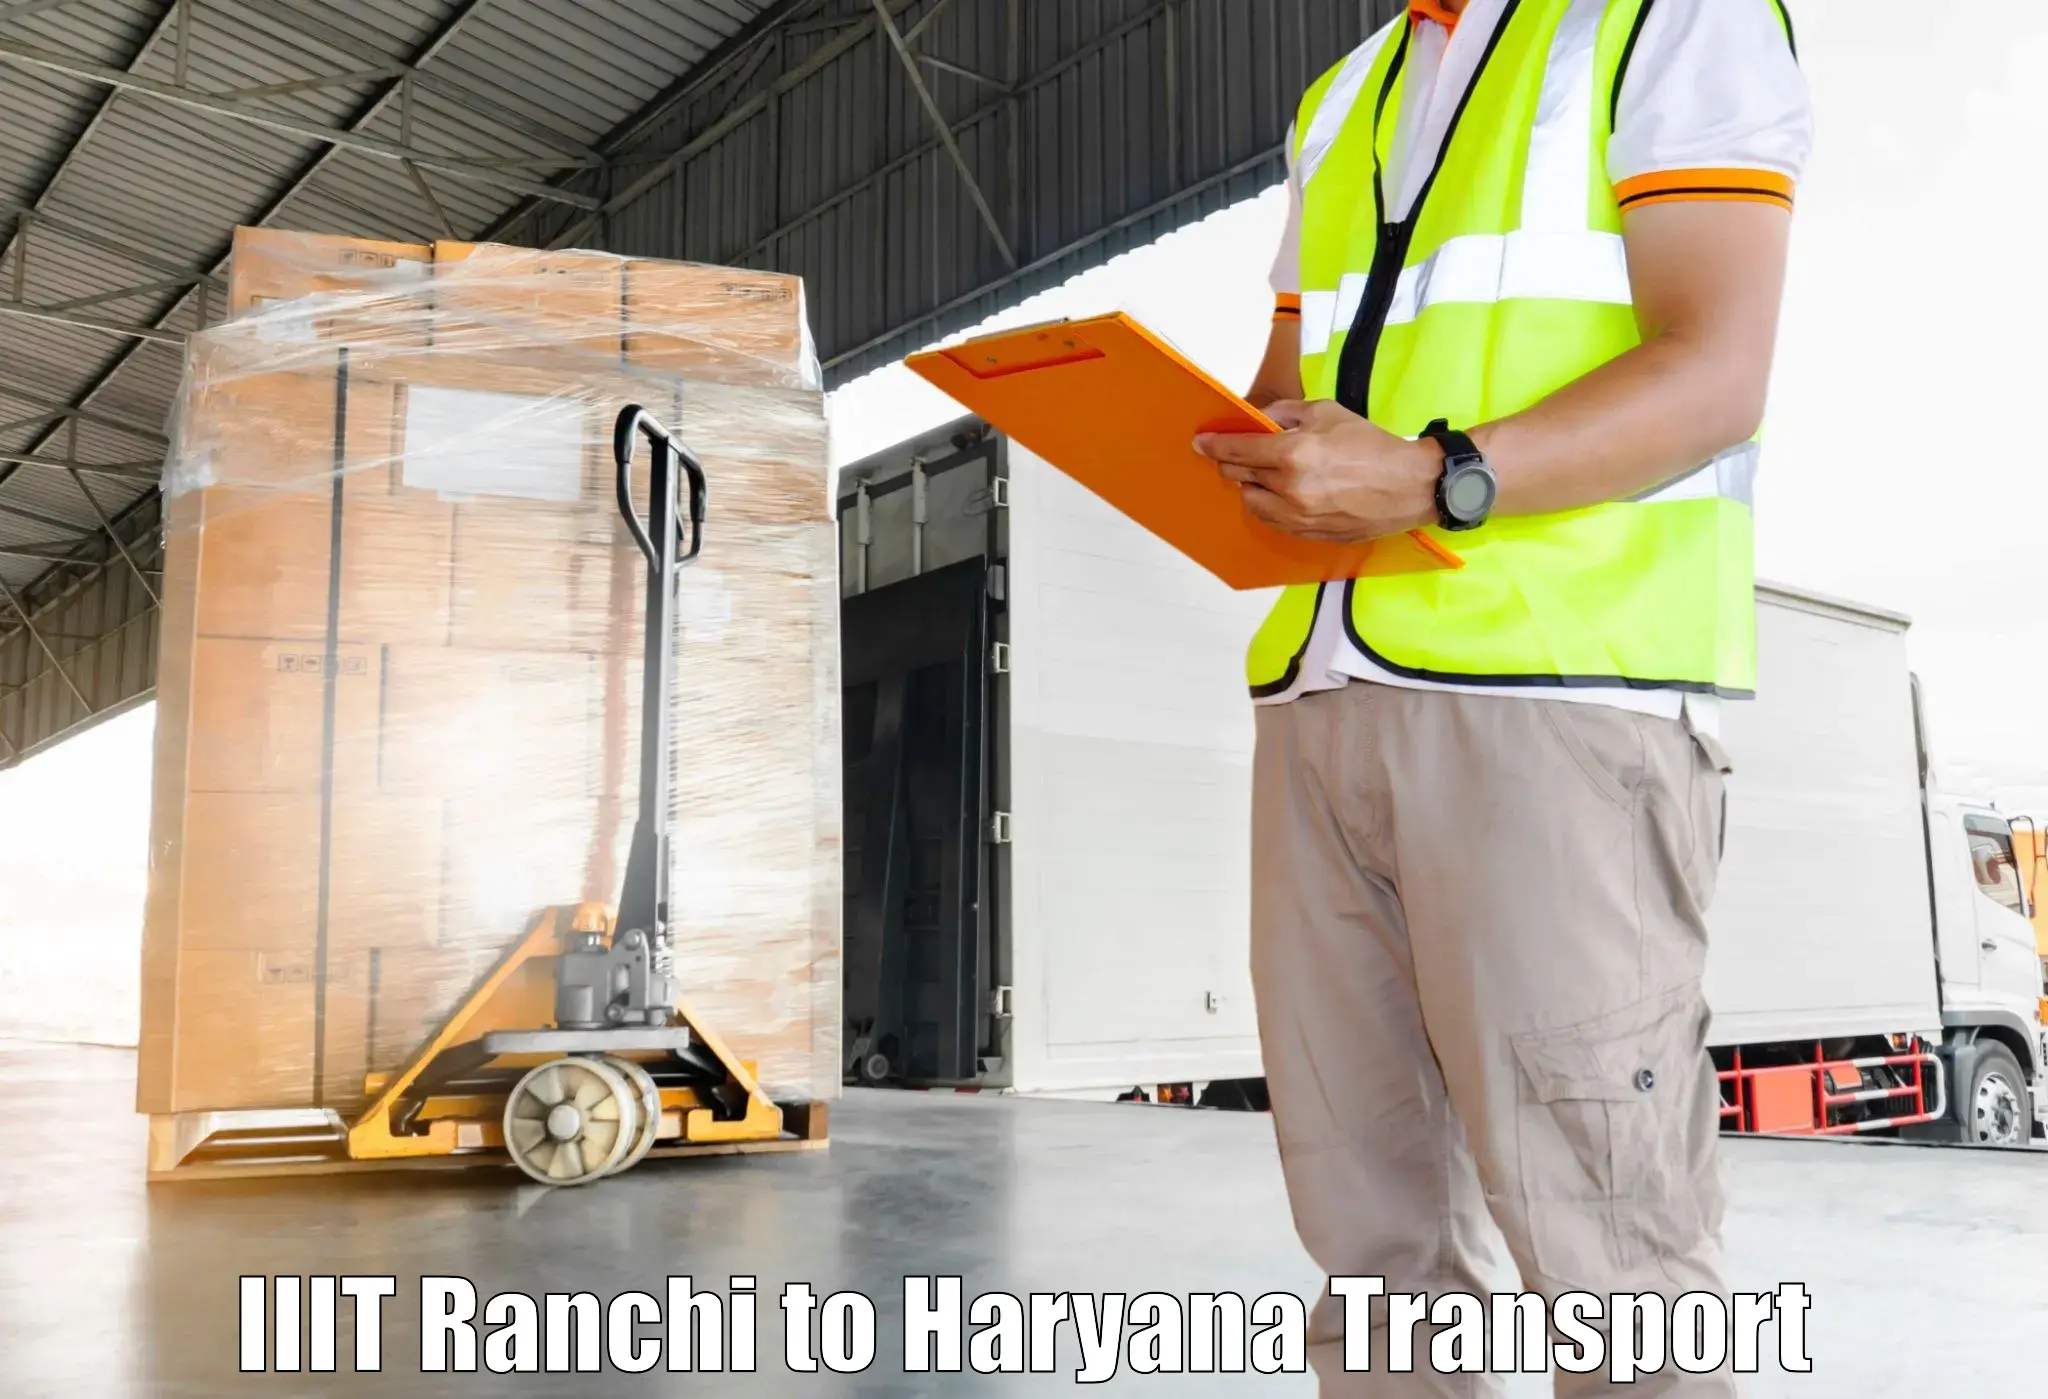 Commercial transport service IIIT Ranchi to Charkhi Dadri